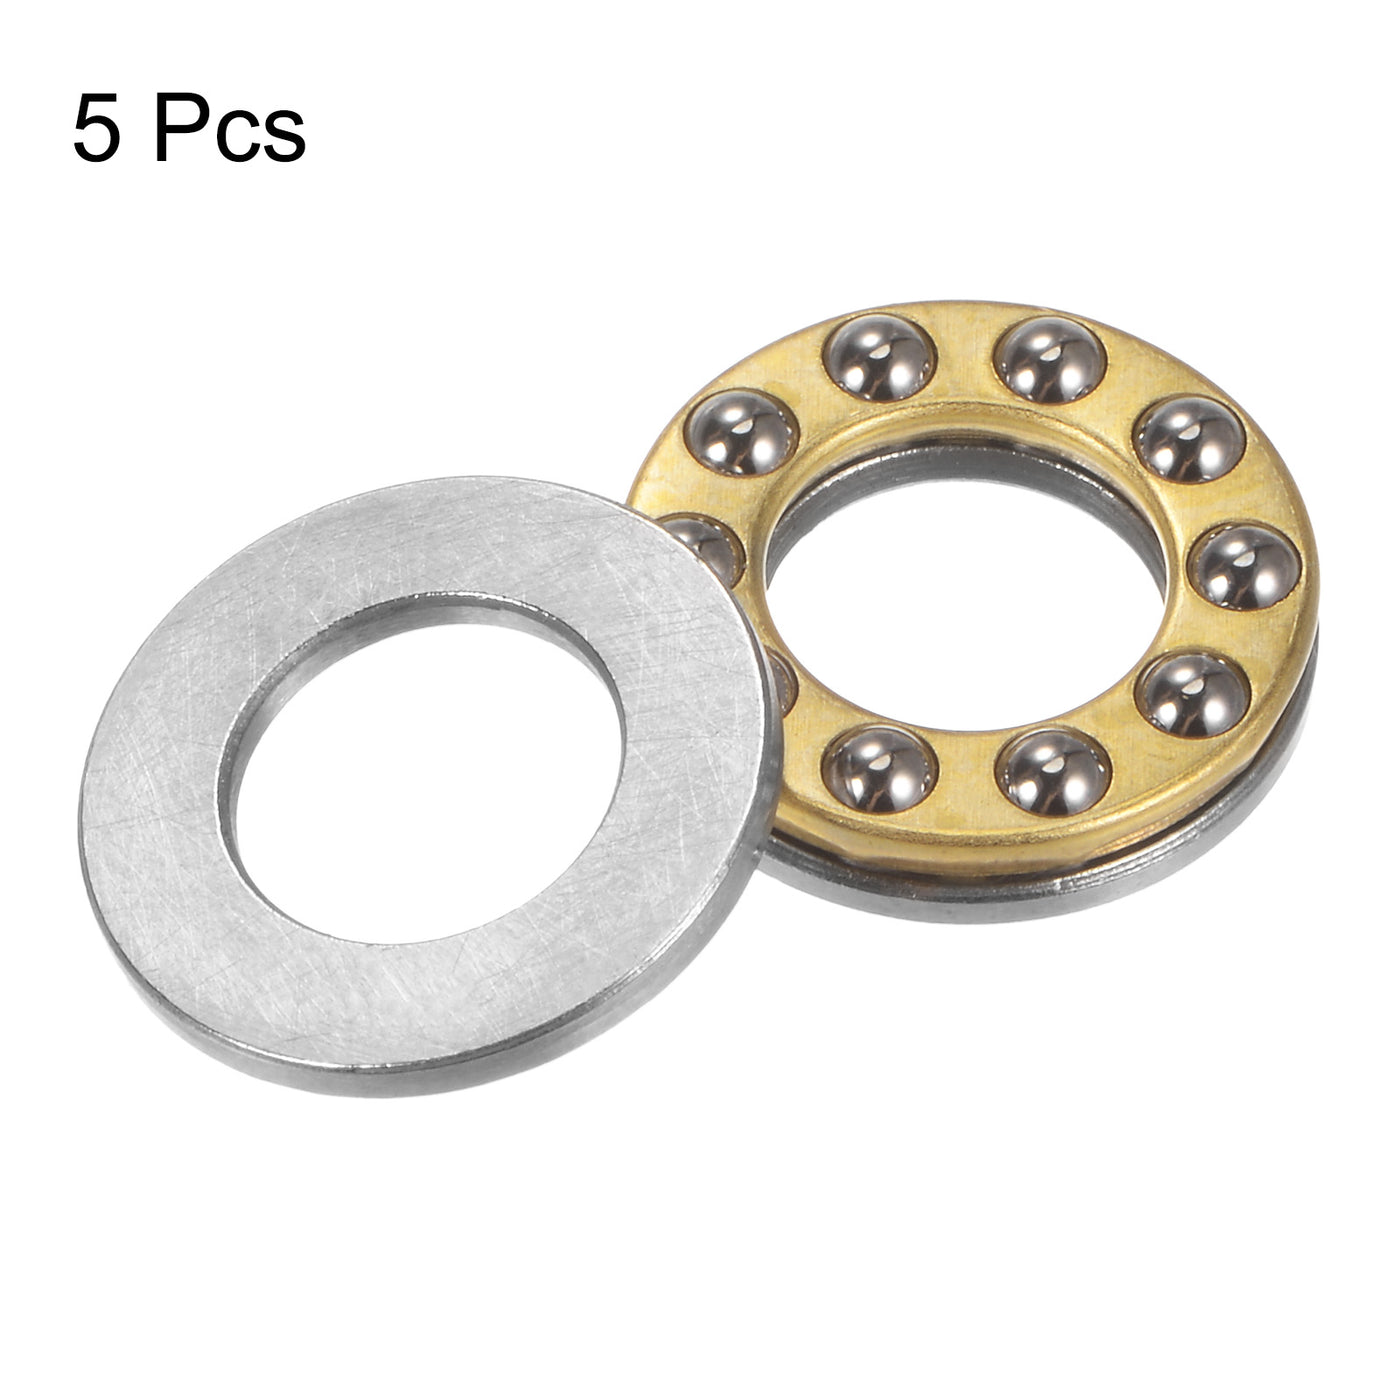 uxcell Uxcell F10-18M Thrust Ball Bearing 10x18x5.5mm Brass with Washers 5pcs